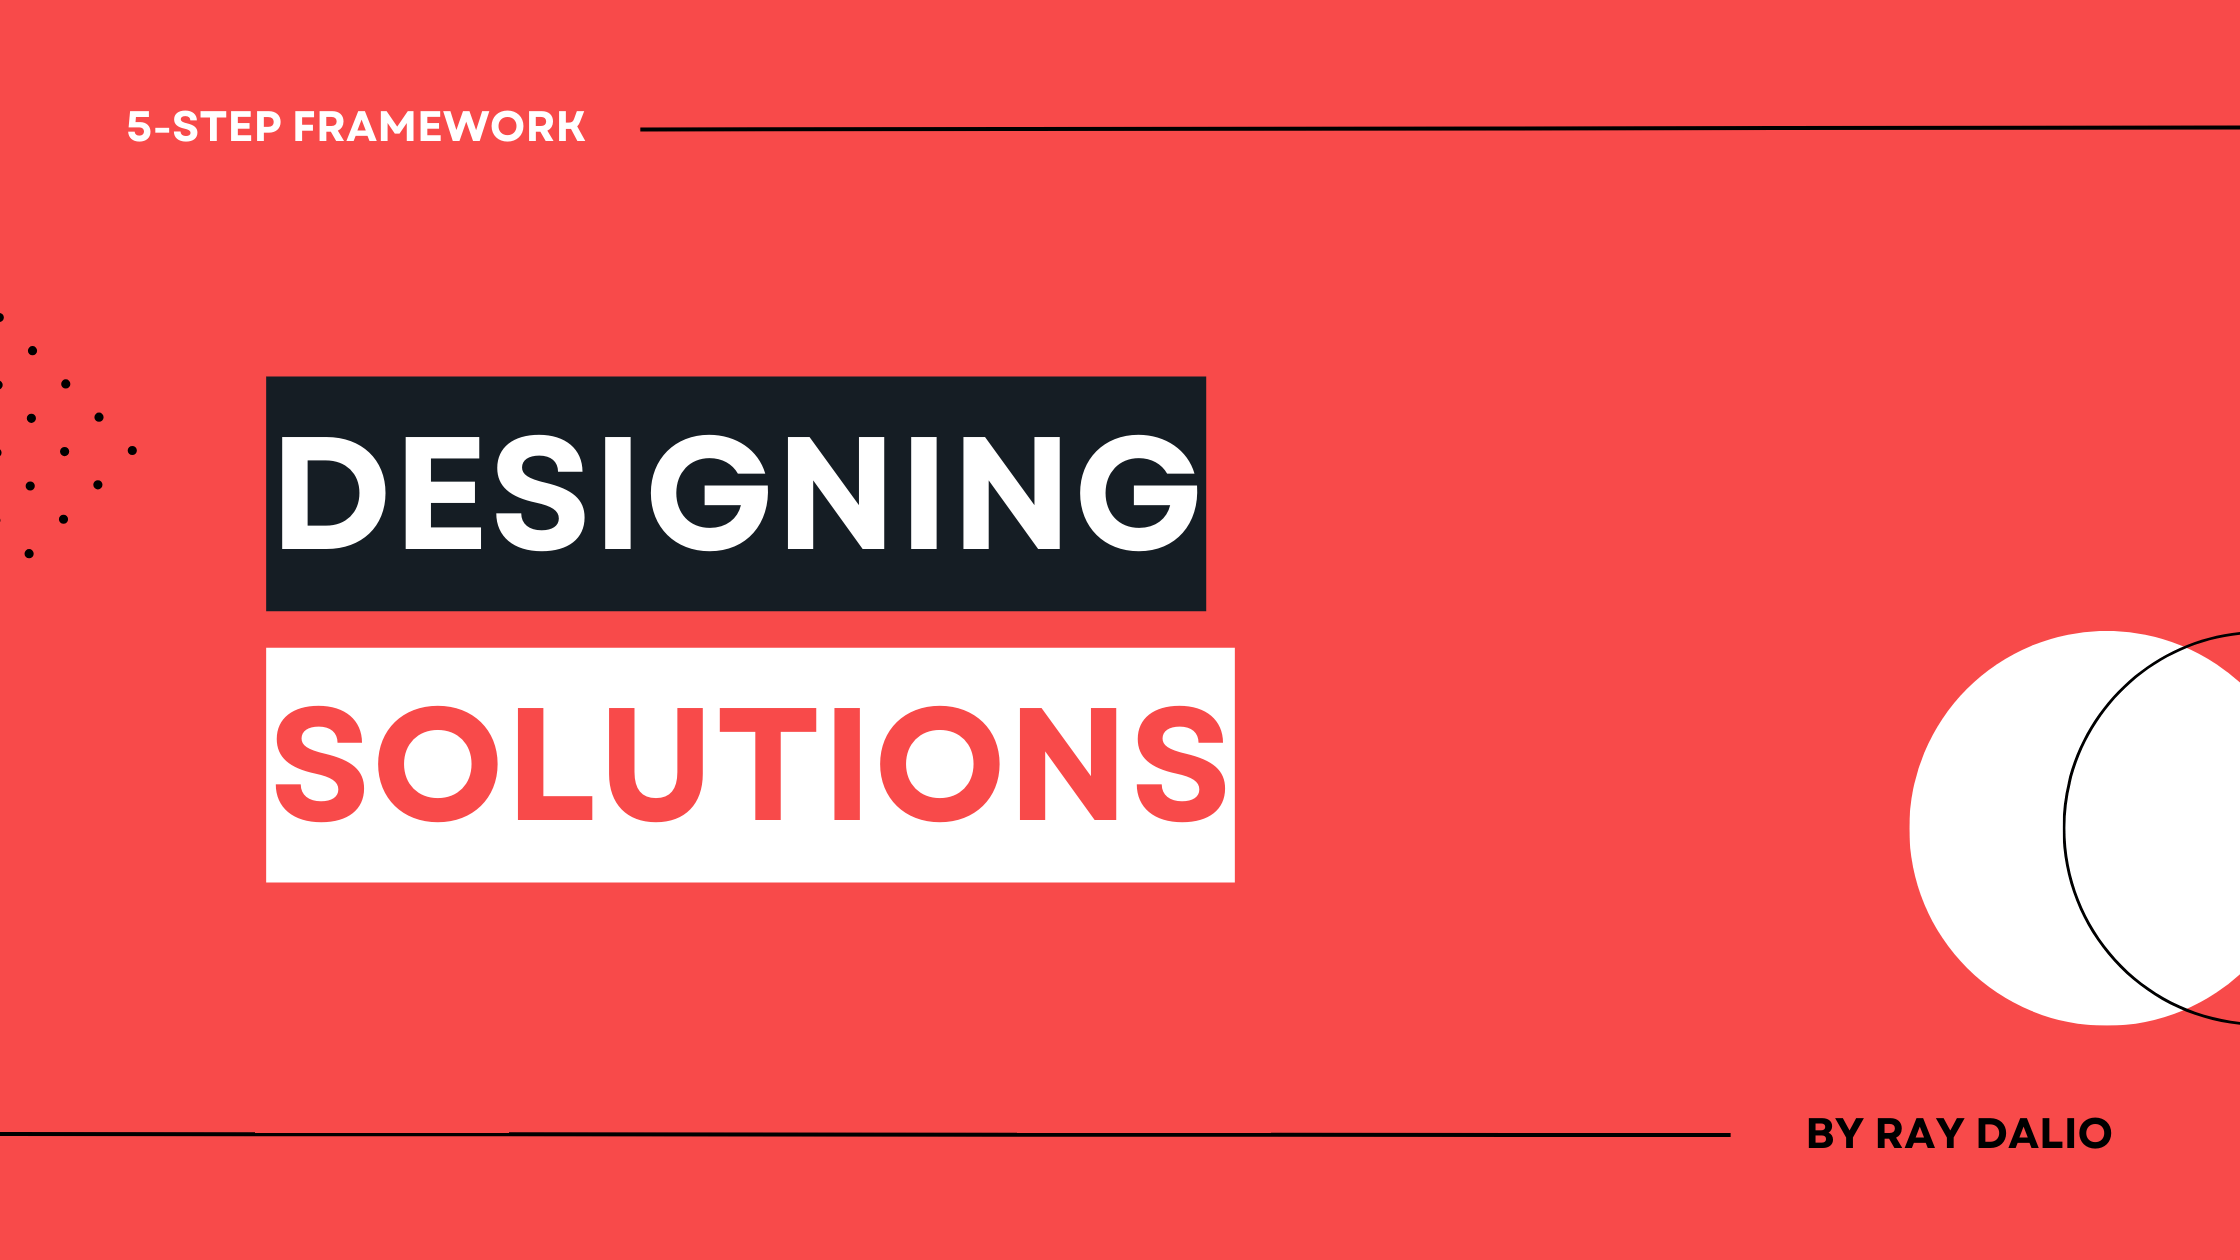 Step 4: Designing Solutions 